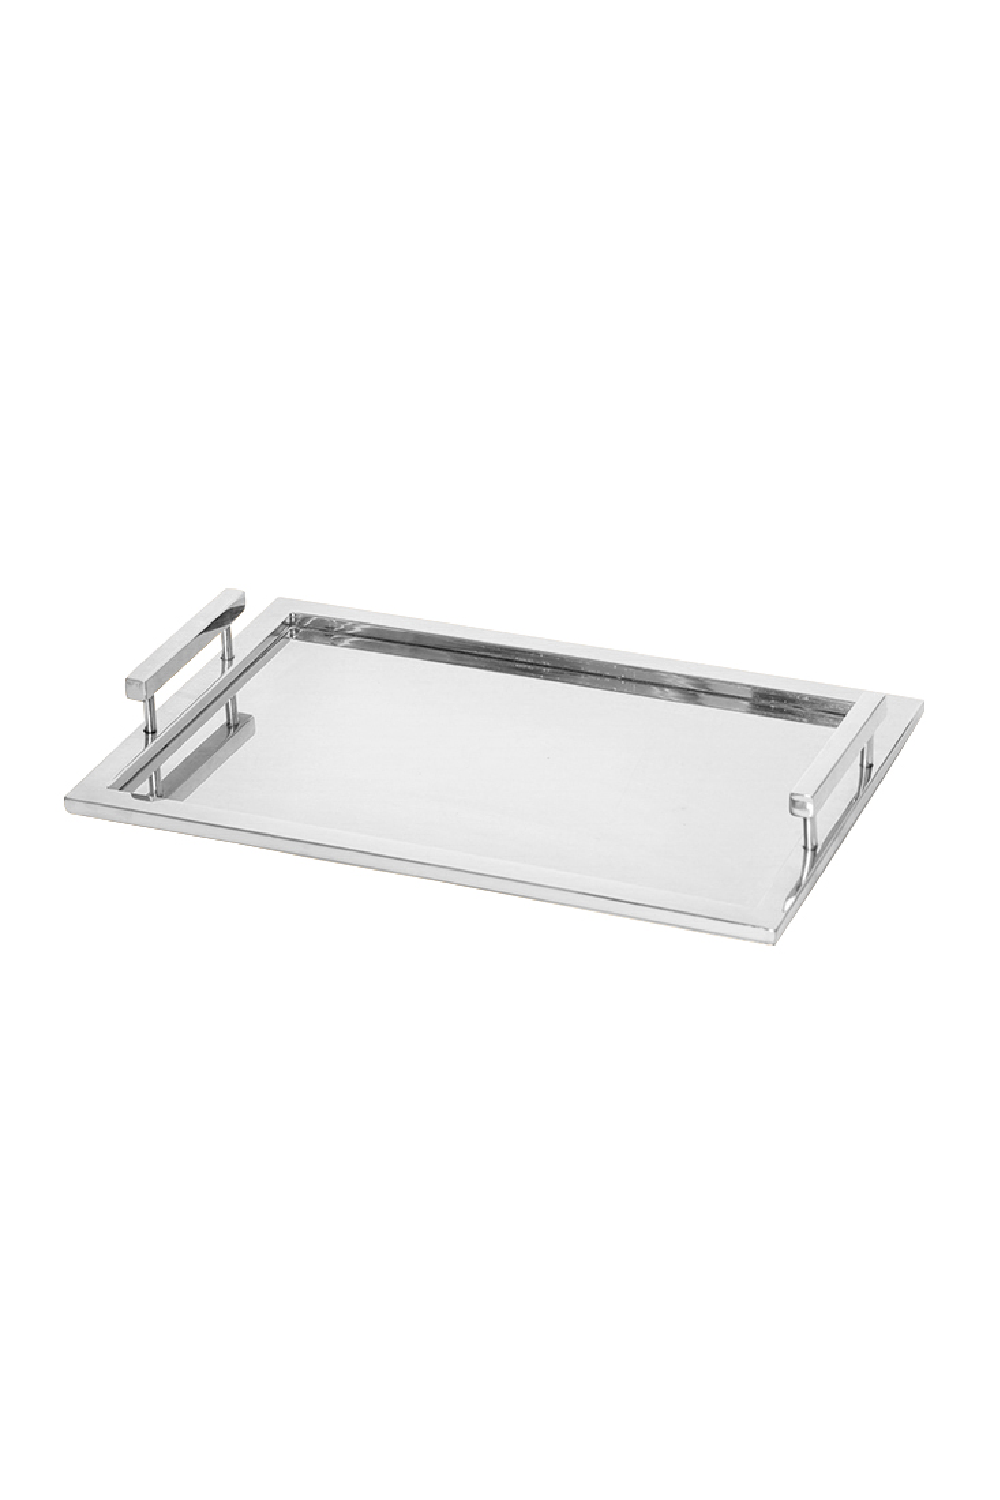 Polished Stainless Steel Tray | Liang & Eimil Callarium | Oroa.com